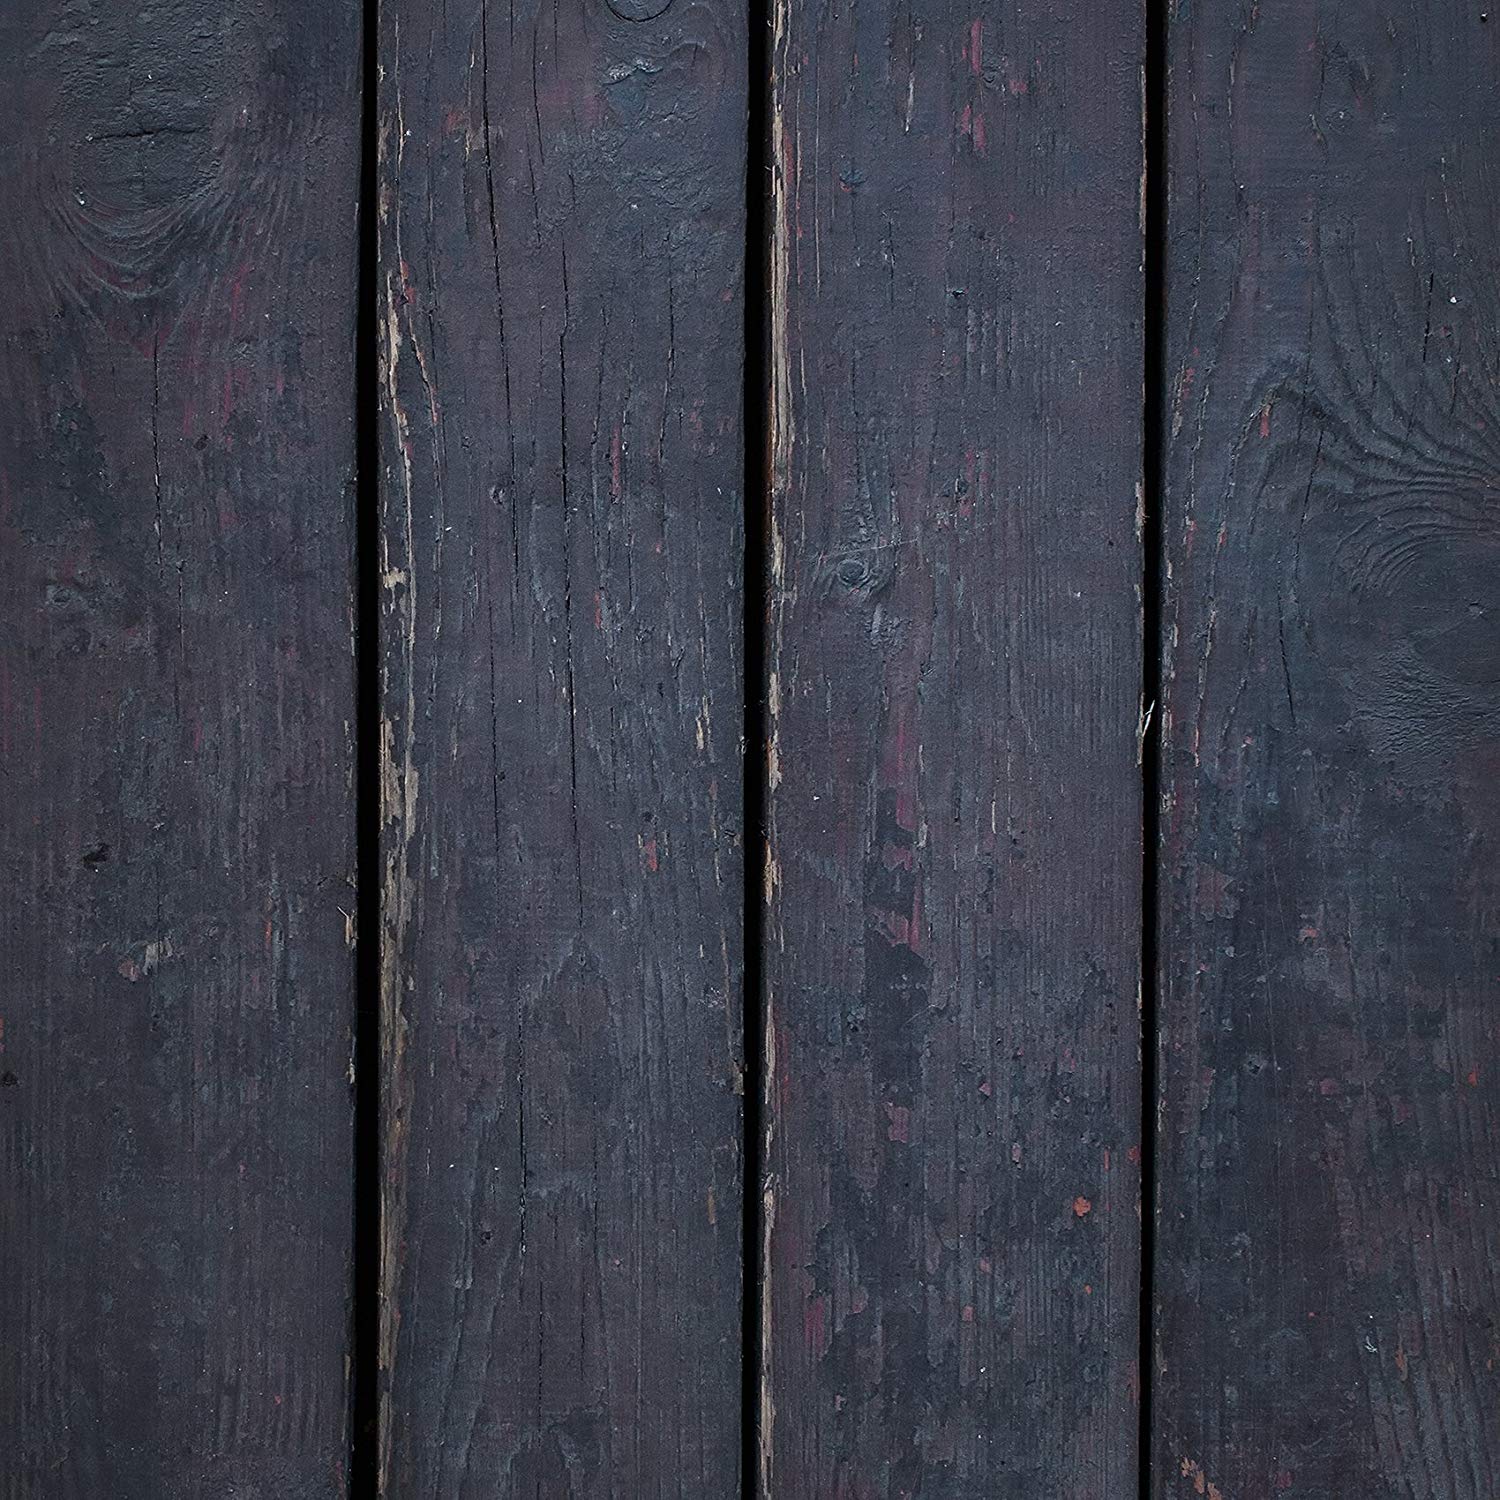 Rustic Distressed Wood Backdrop Photography Background #1787 Black